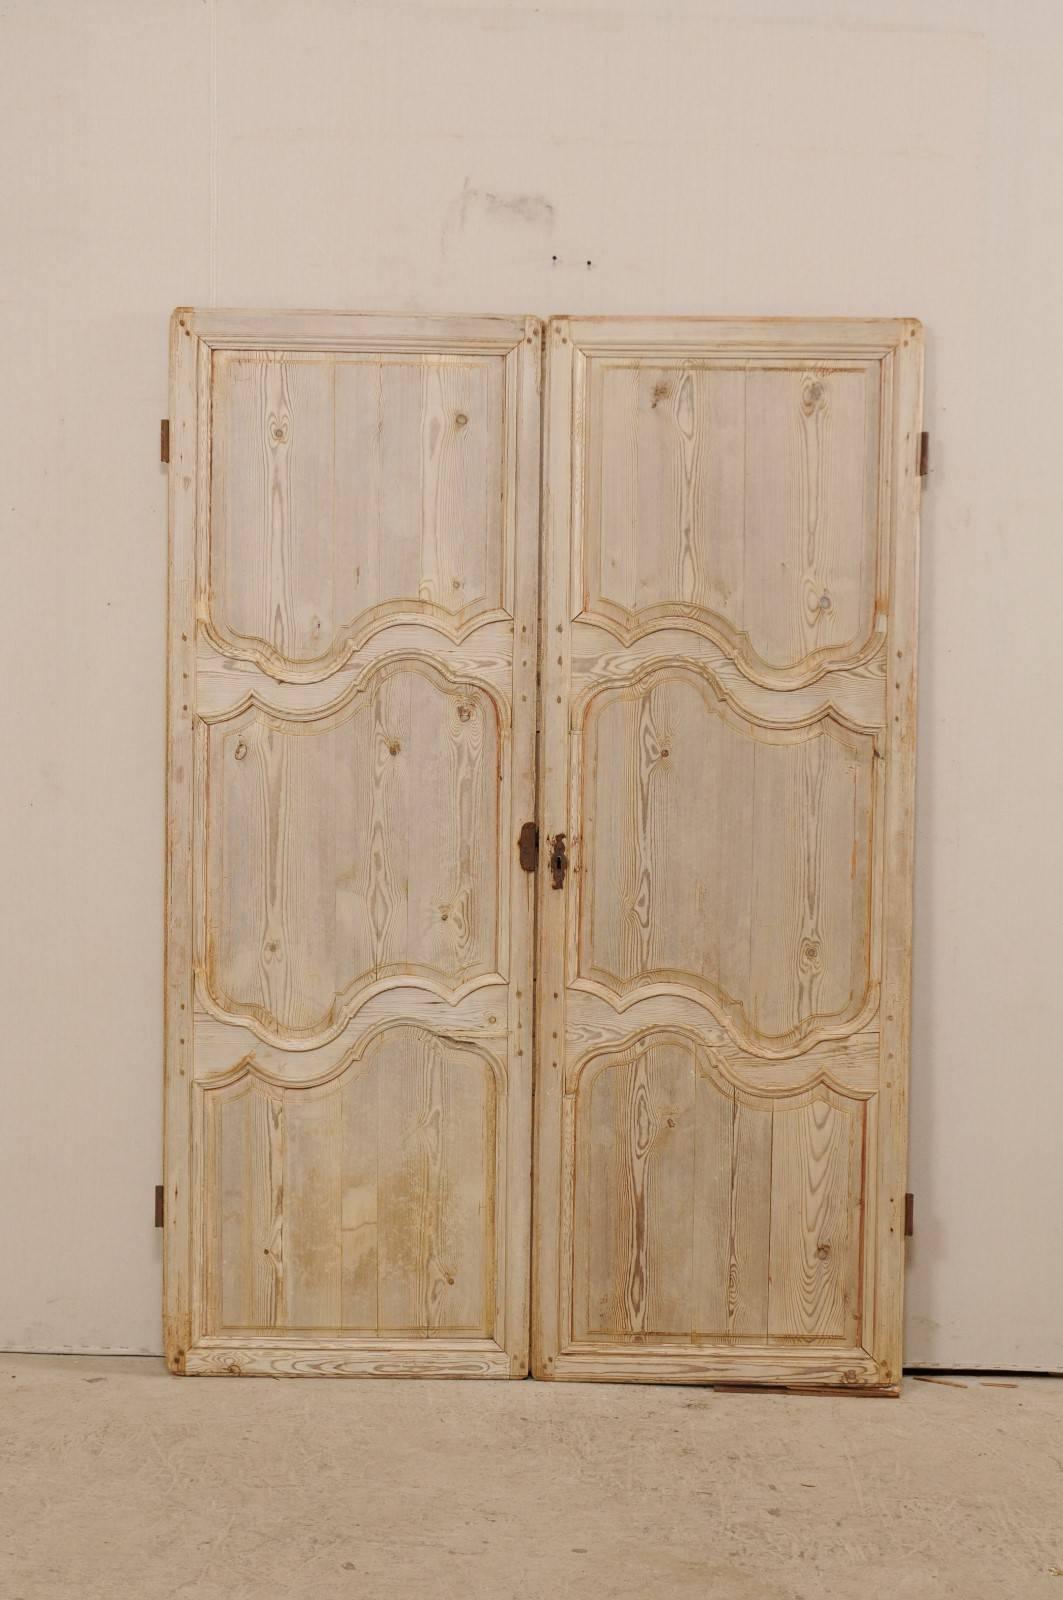 A pair of French bleached wood doors from the 19th century. This pair of French doors each feature three recessed panels, which have a sweetly carved curvy edging along the middle trim sections of the panel. The doors have a pale, bleached wood